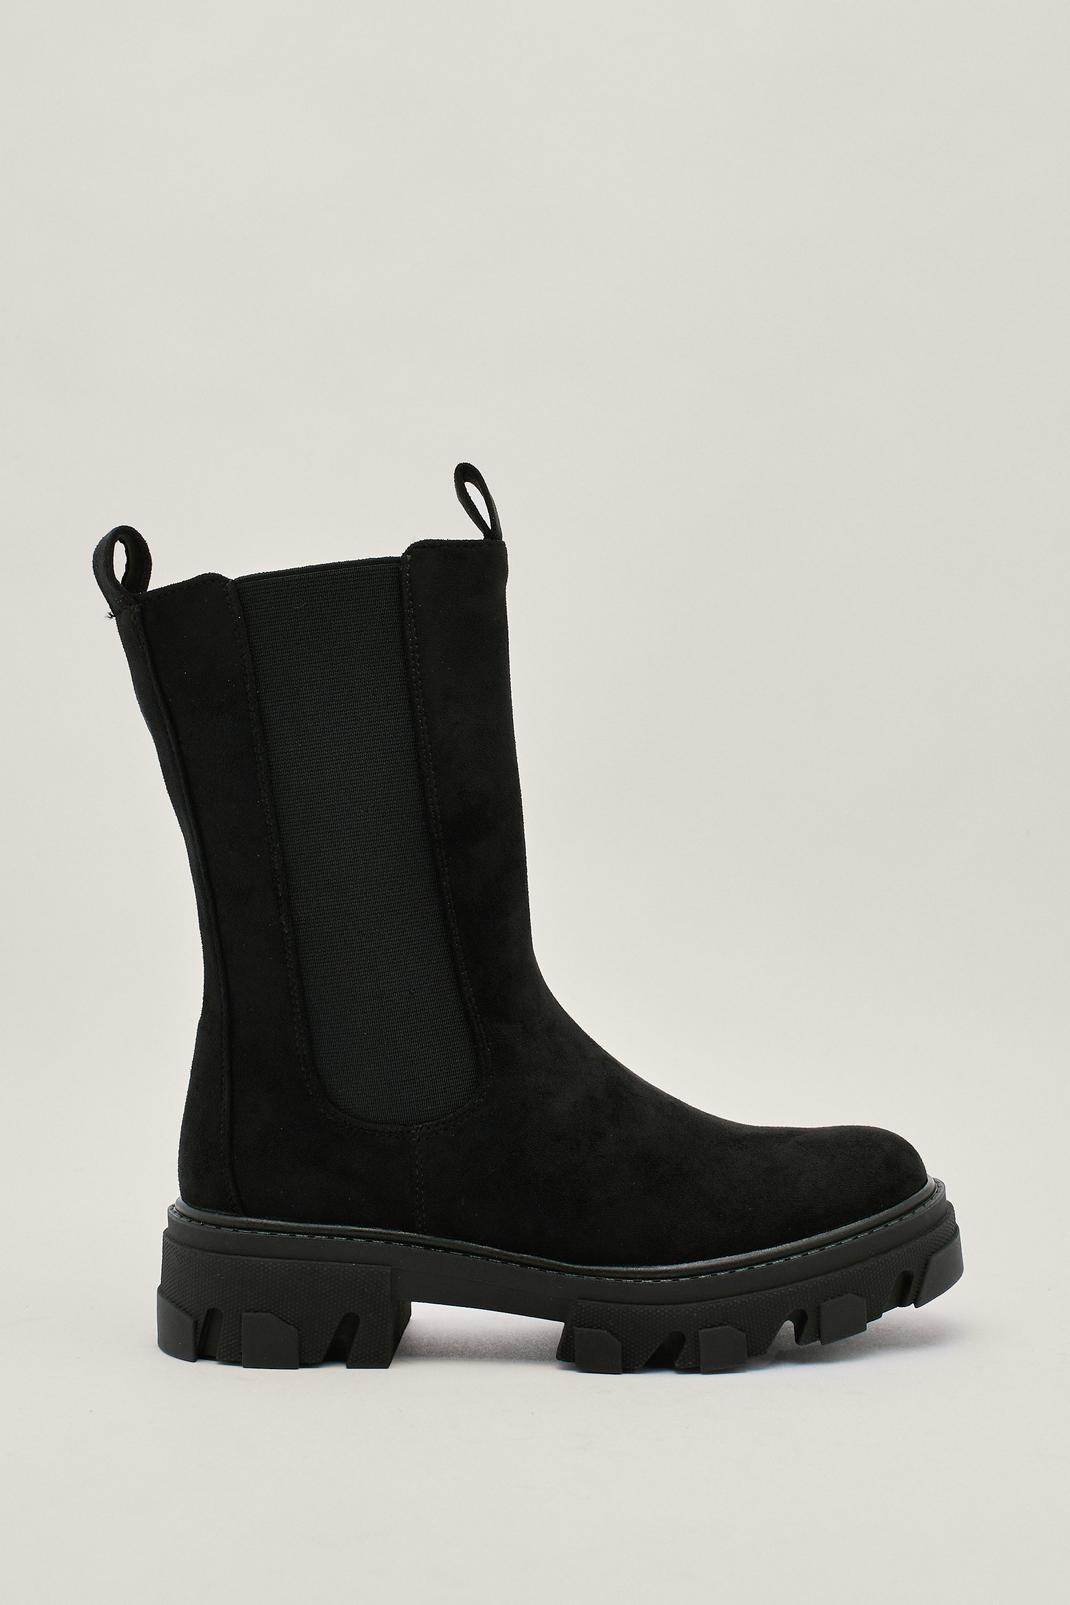 Black Faux Suede Cleated Sole Chelsea Boots image number 1